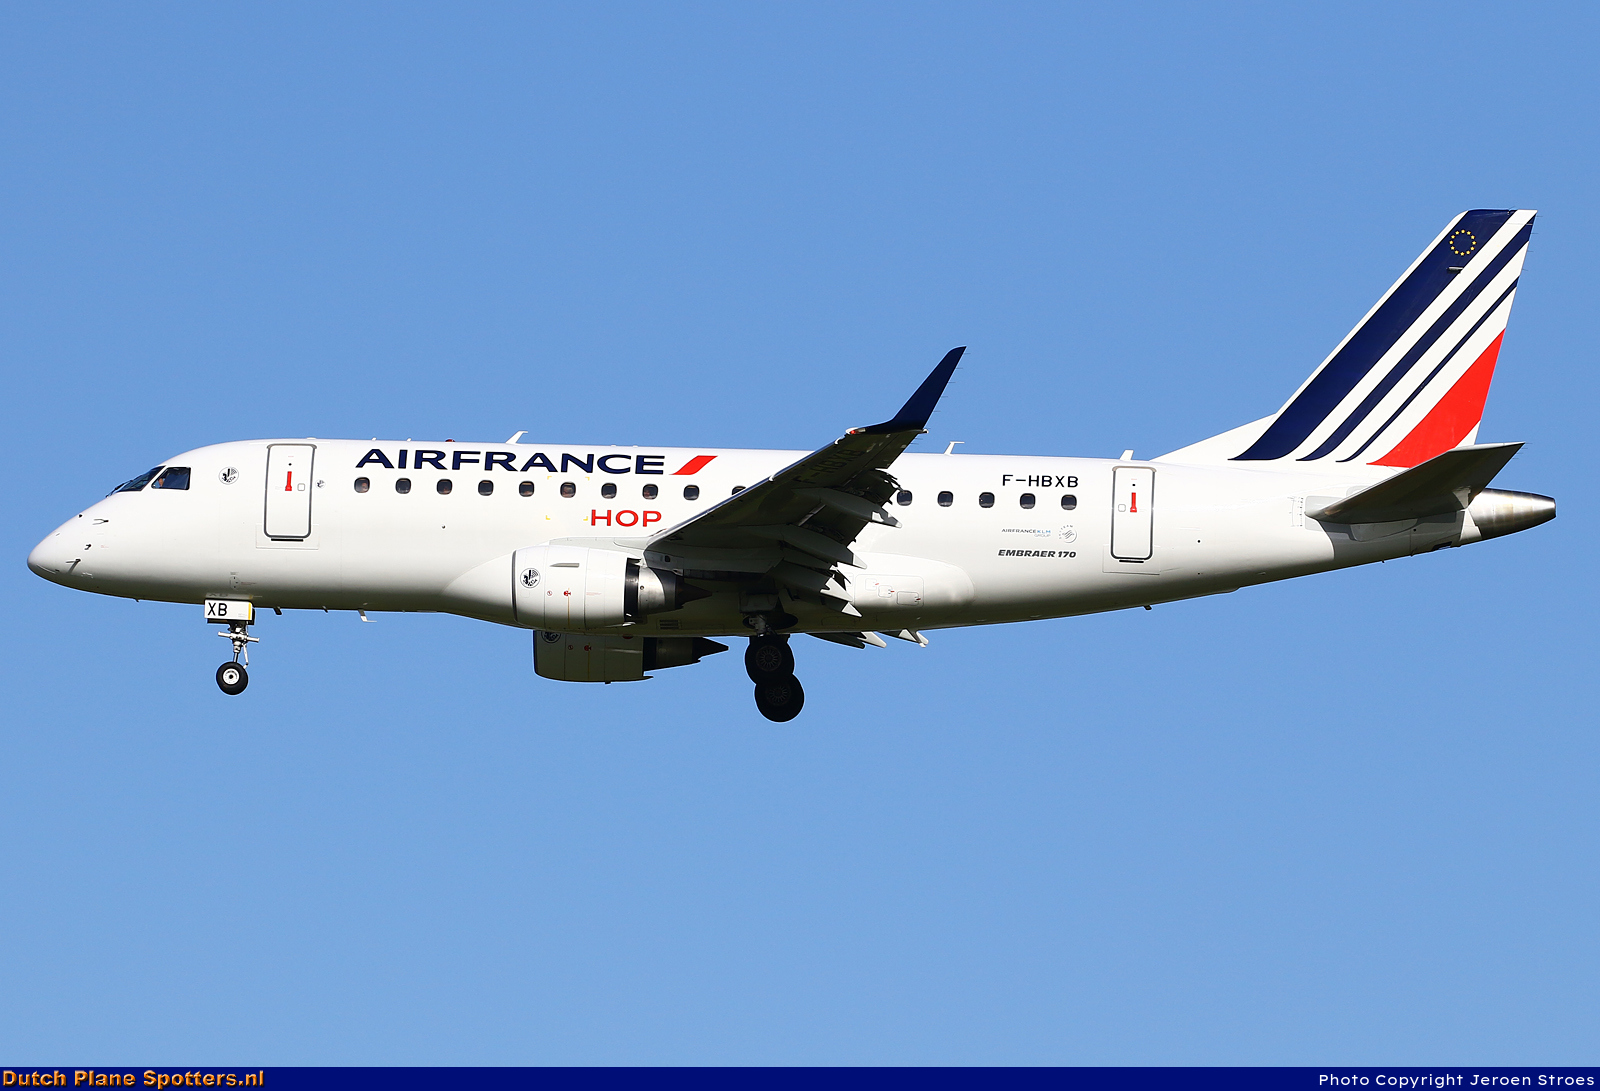 F-HBXB Embraer 170 Hop (Air France) by Jeroen Stroes